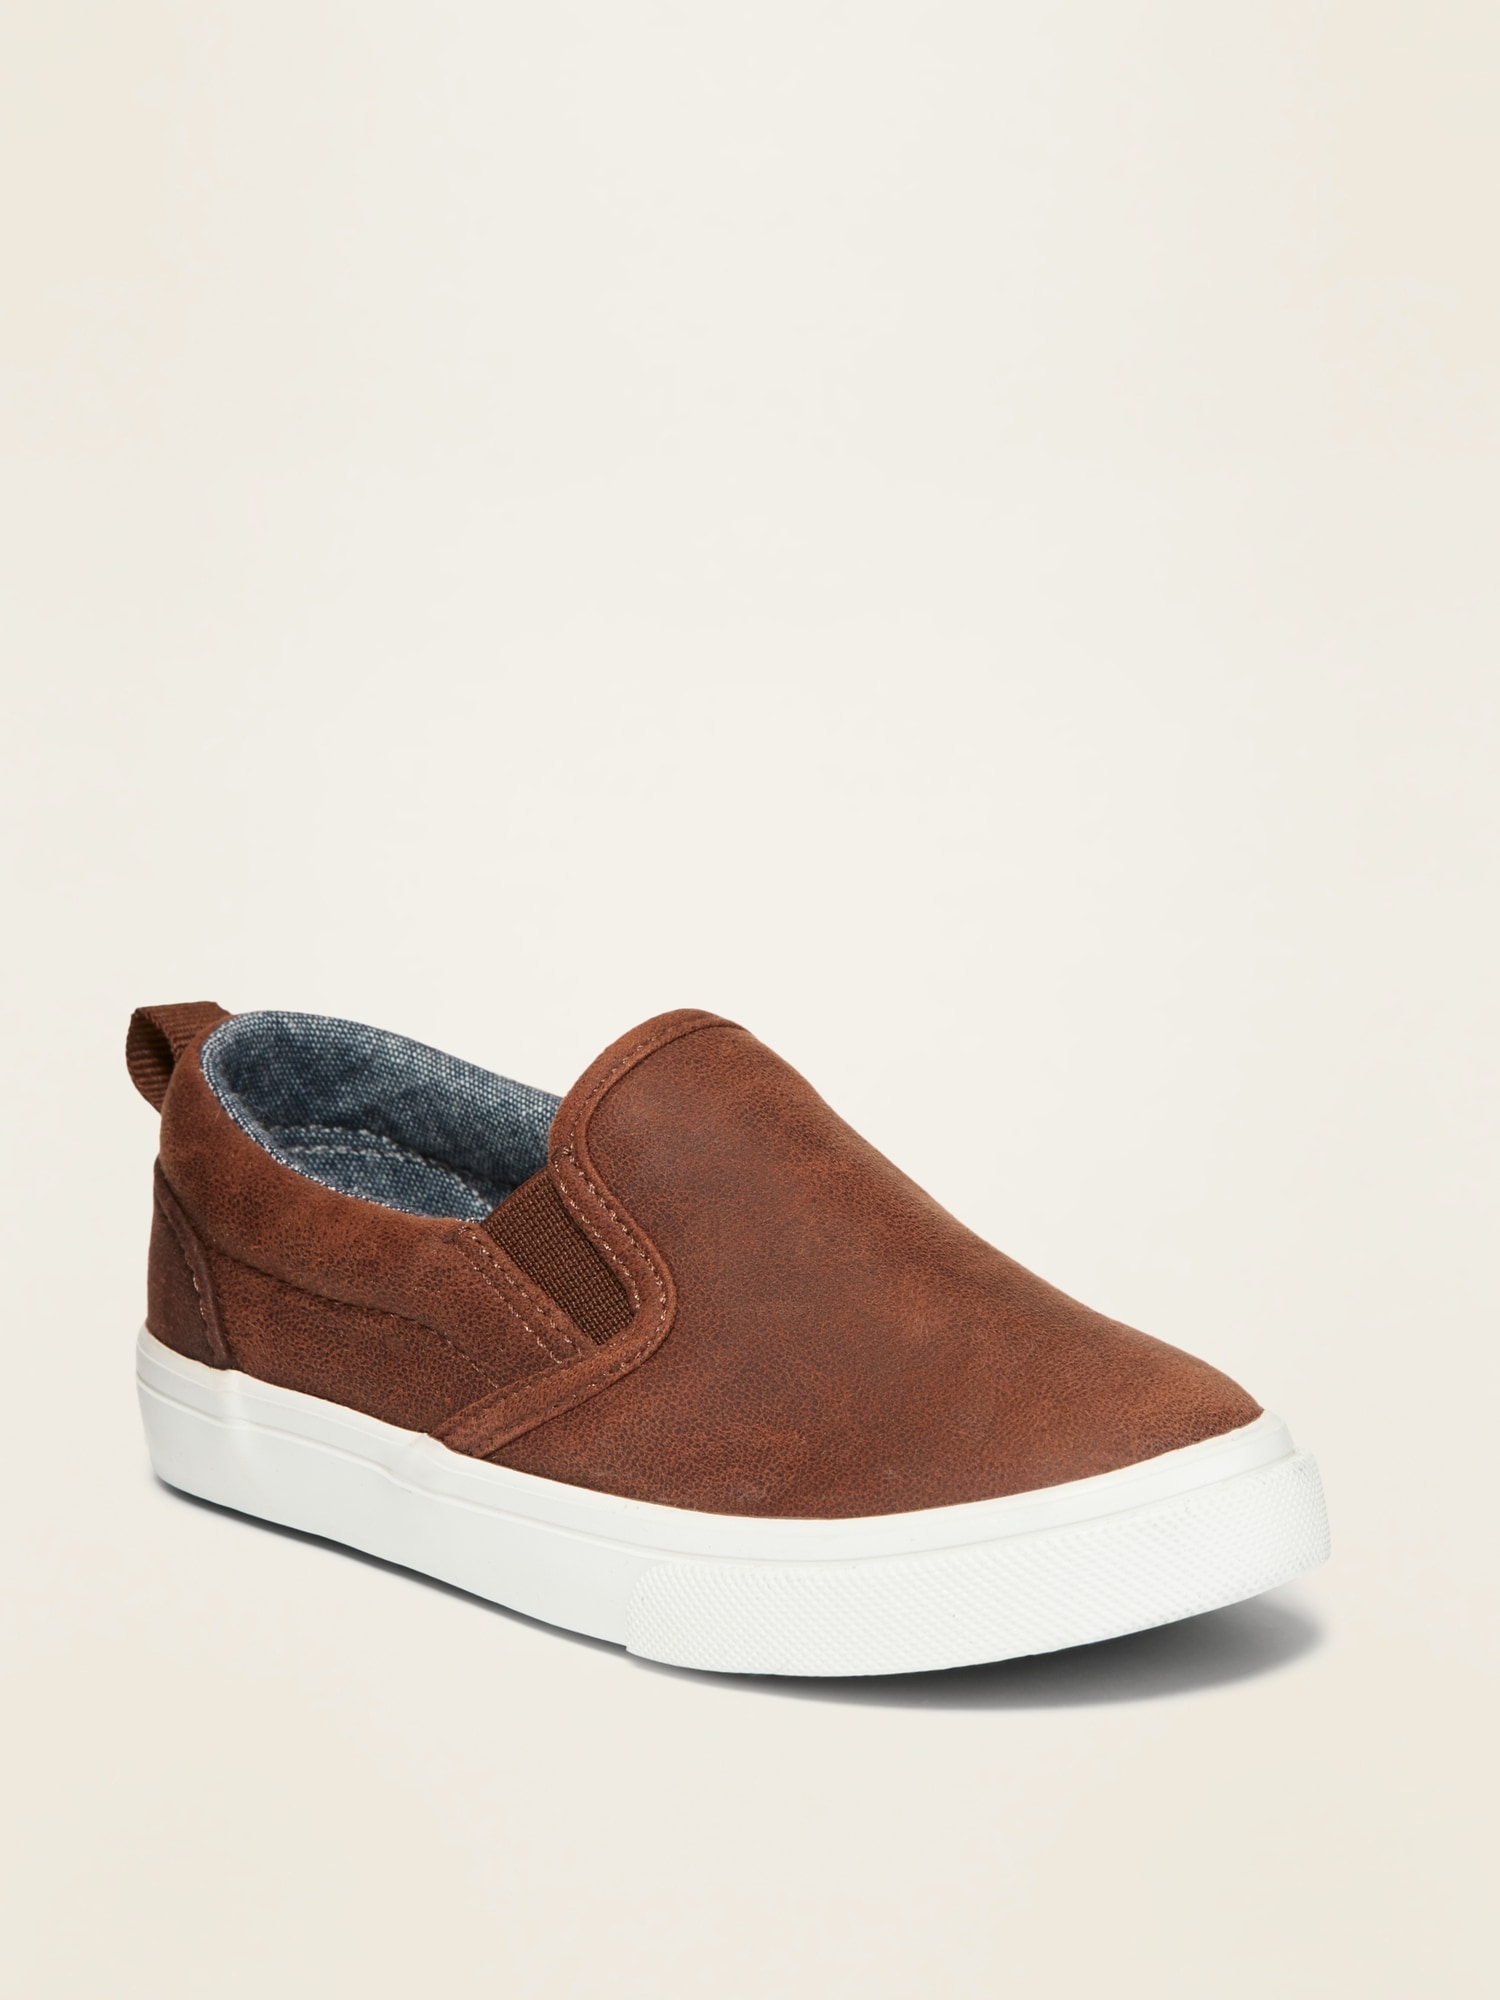 Unisex Faux-Leather Slip-Ons for 